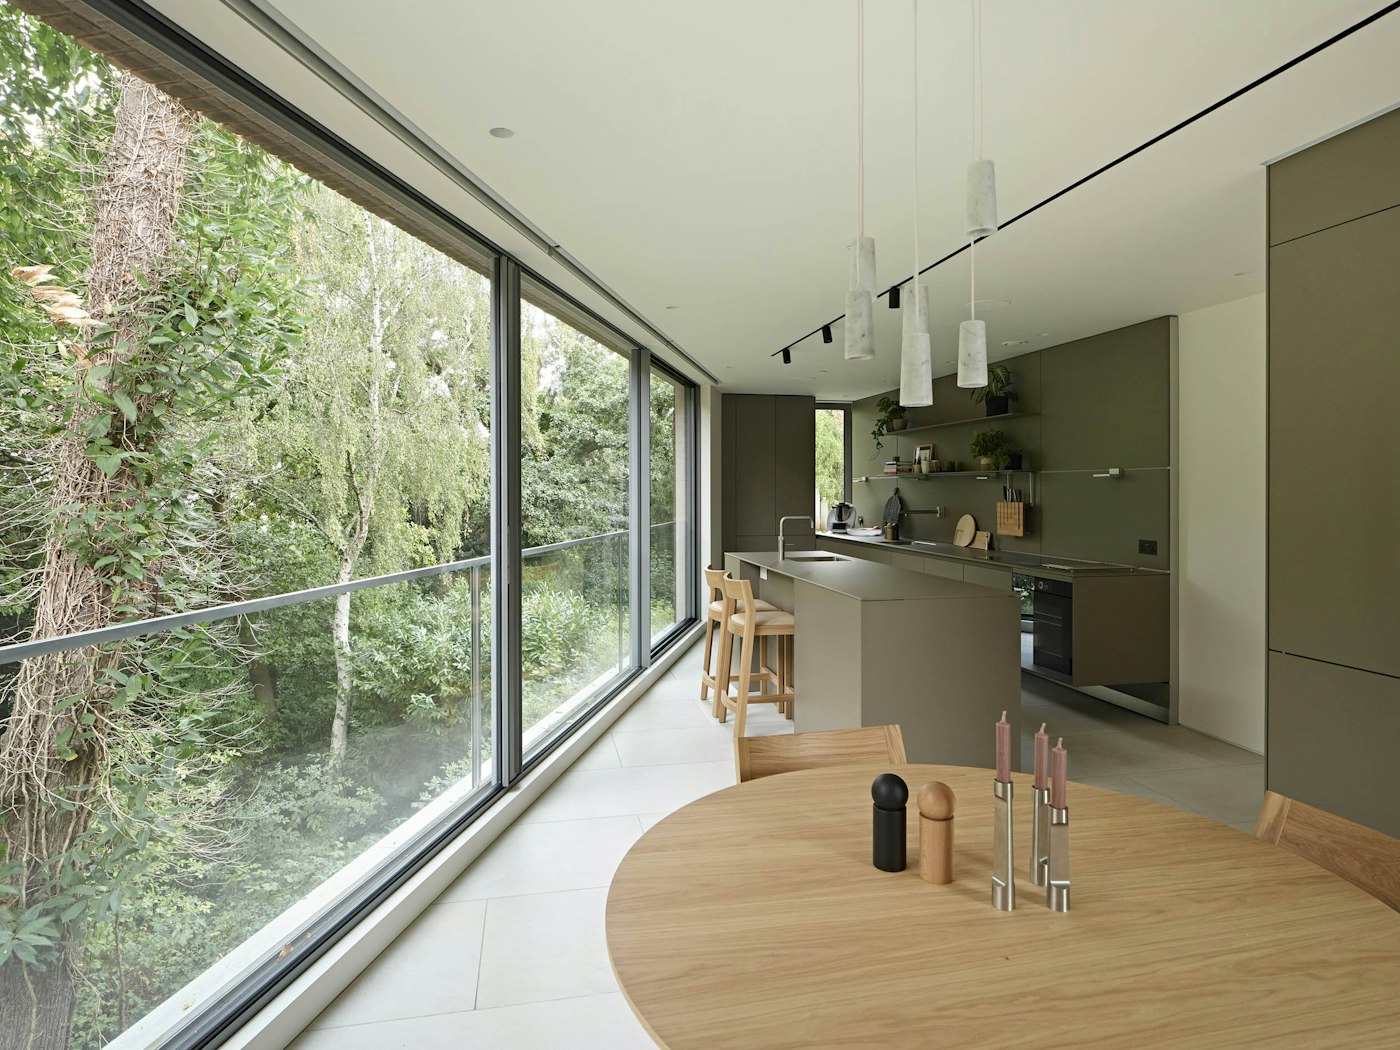 From paper to reality, the house build materialised down to the last detail, including this Bulthaup kitchen